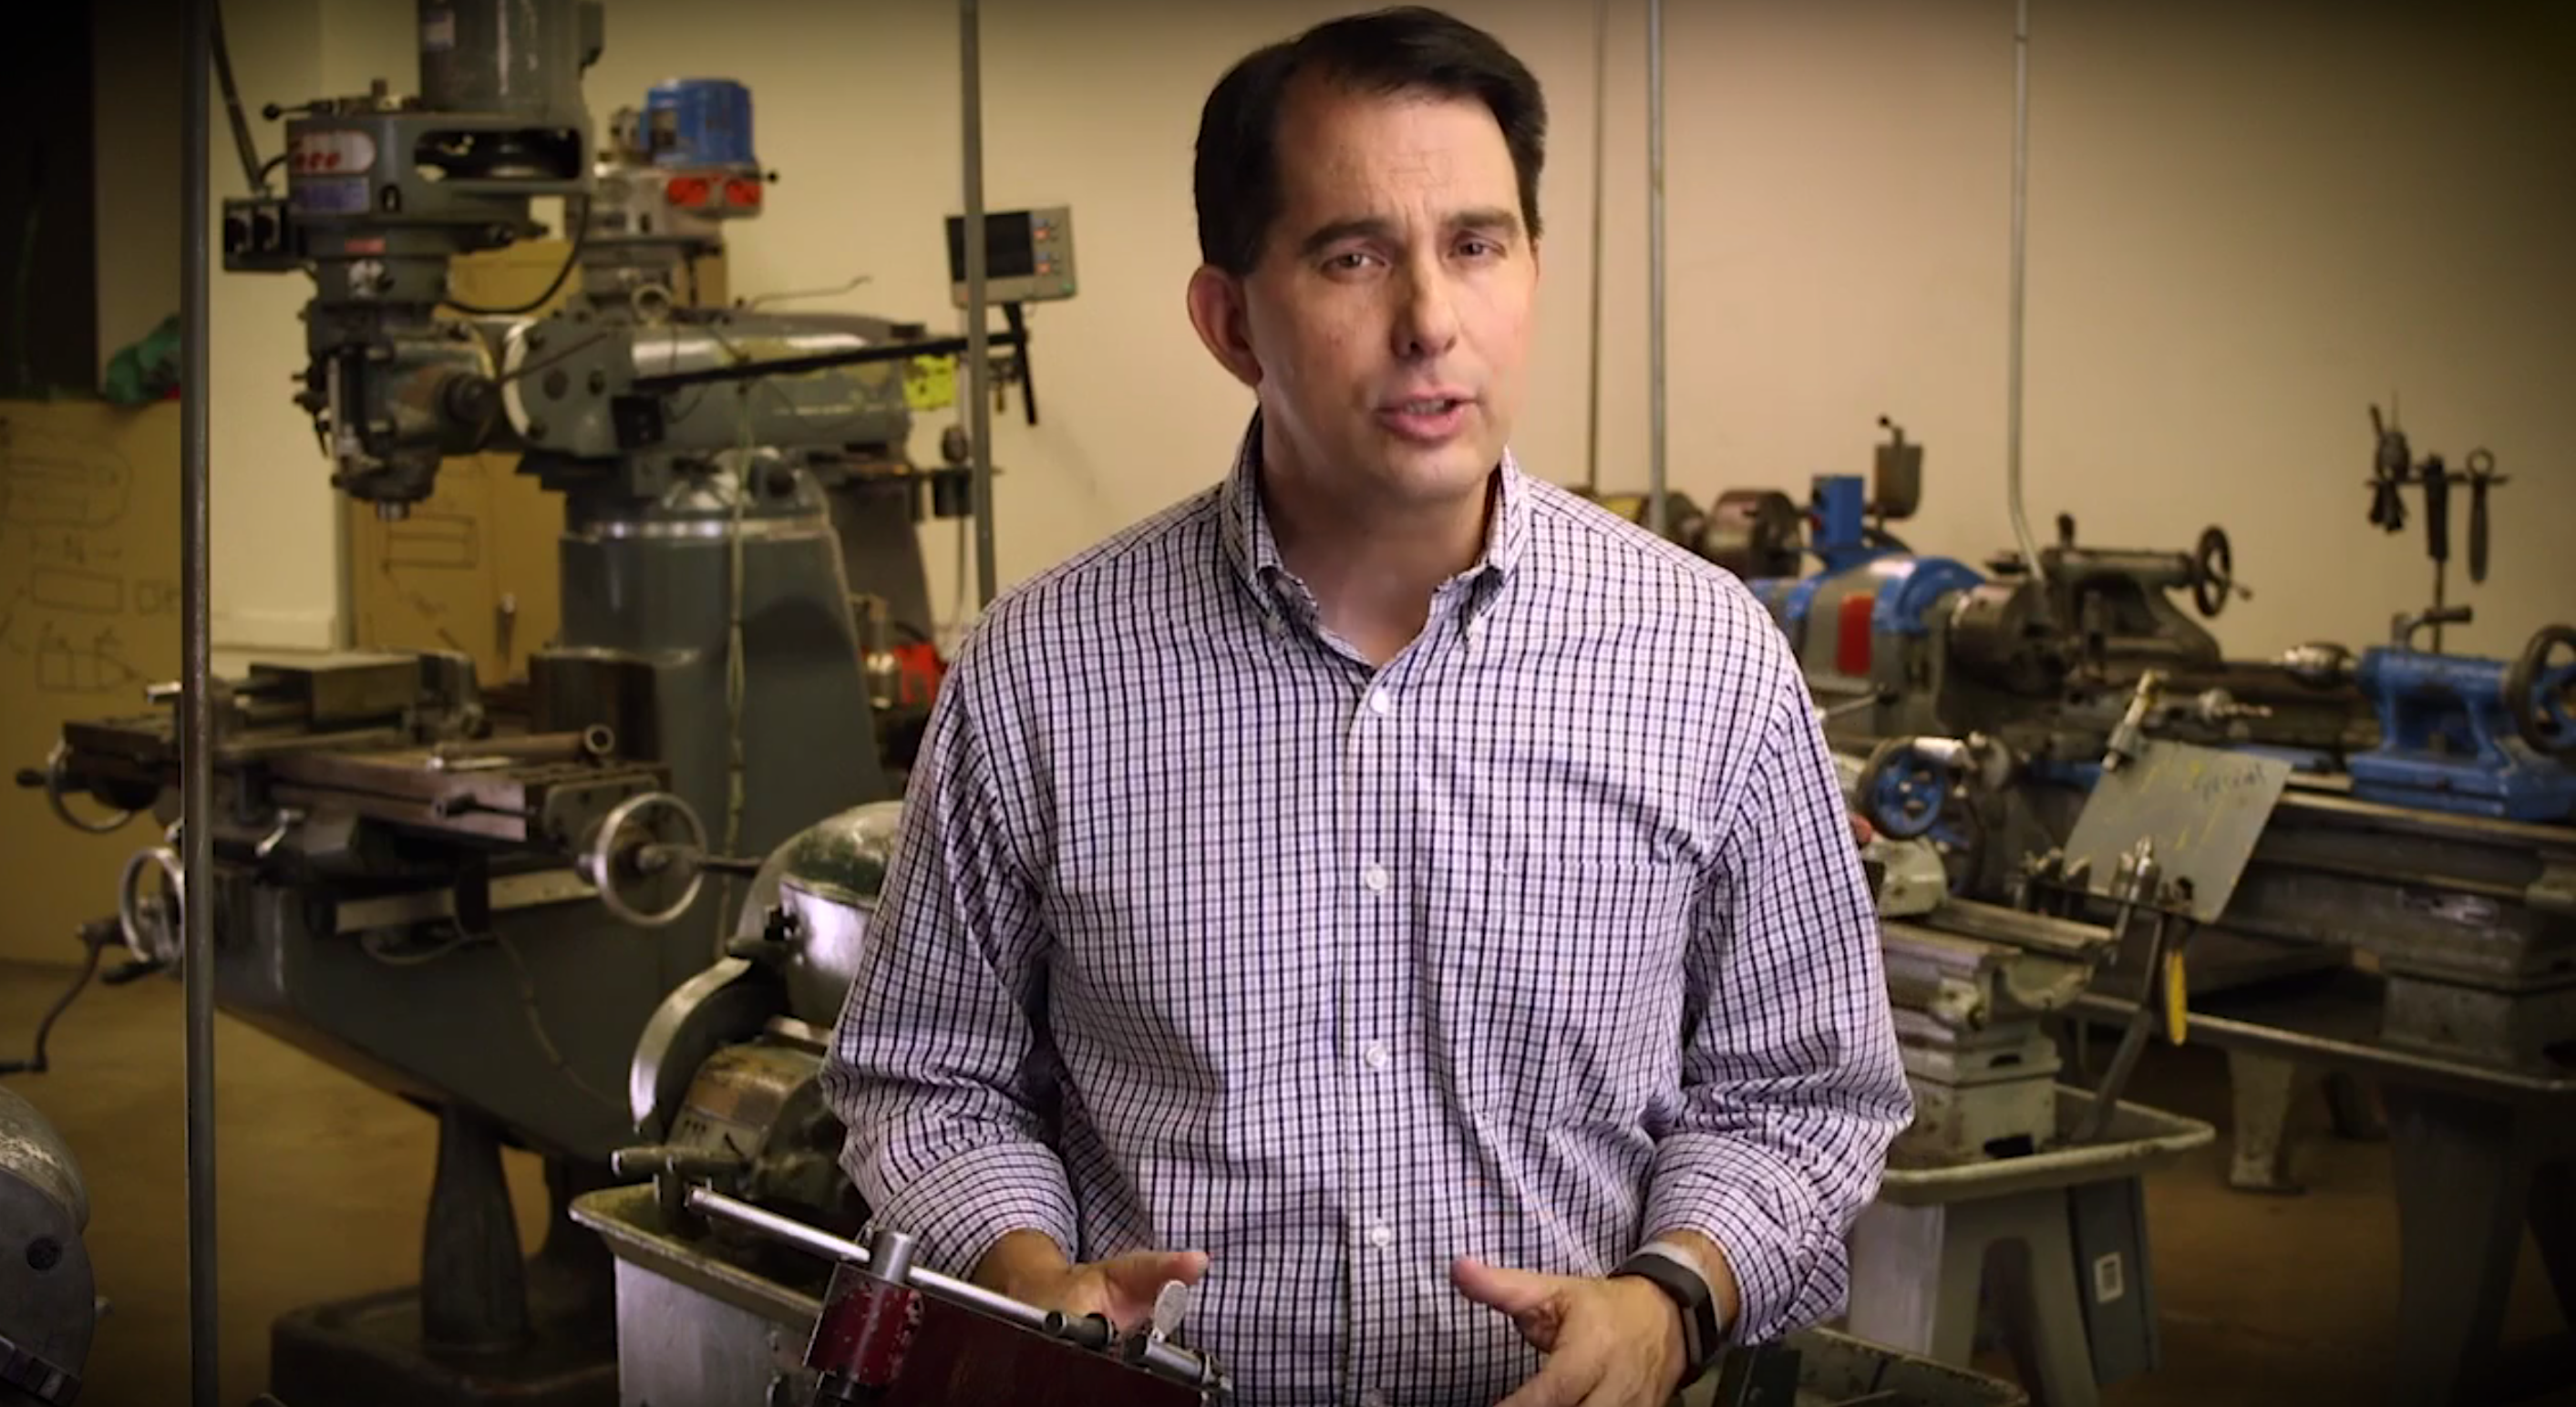 Scott Walker in his youth apprenticeship tv campaign ad